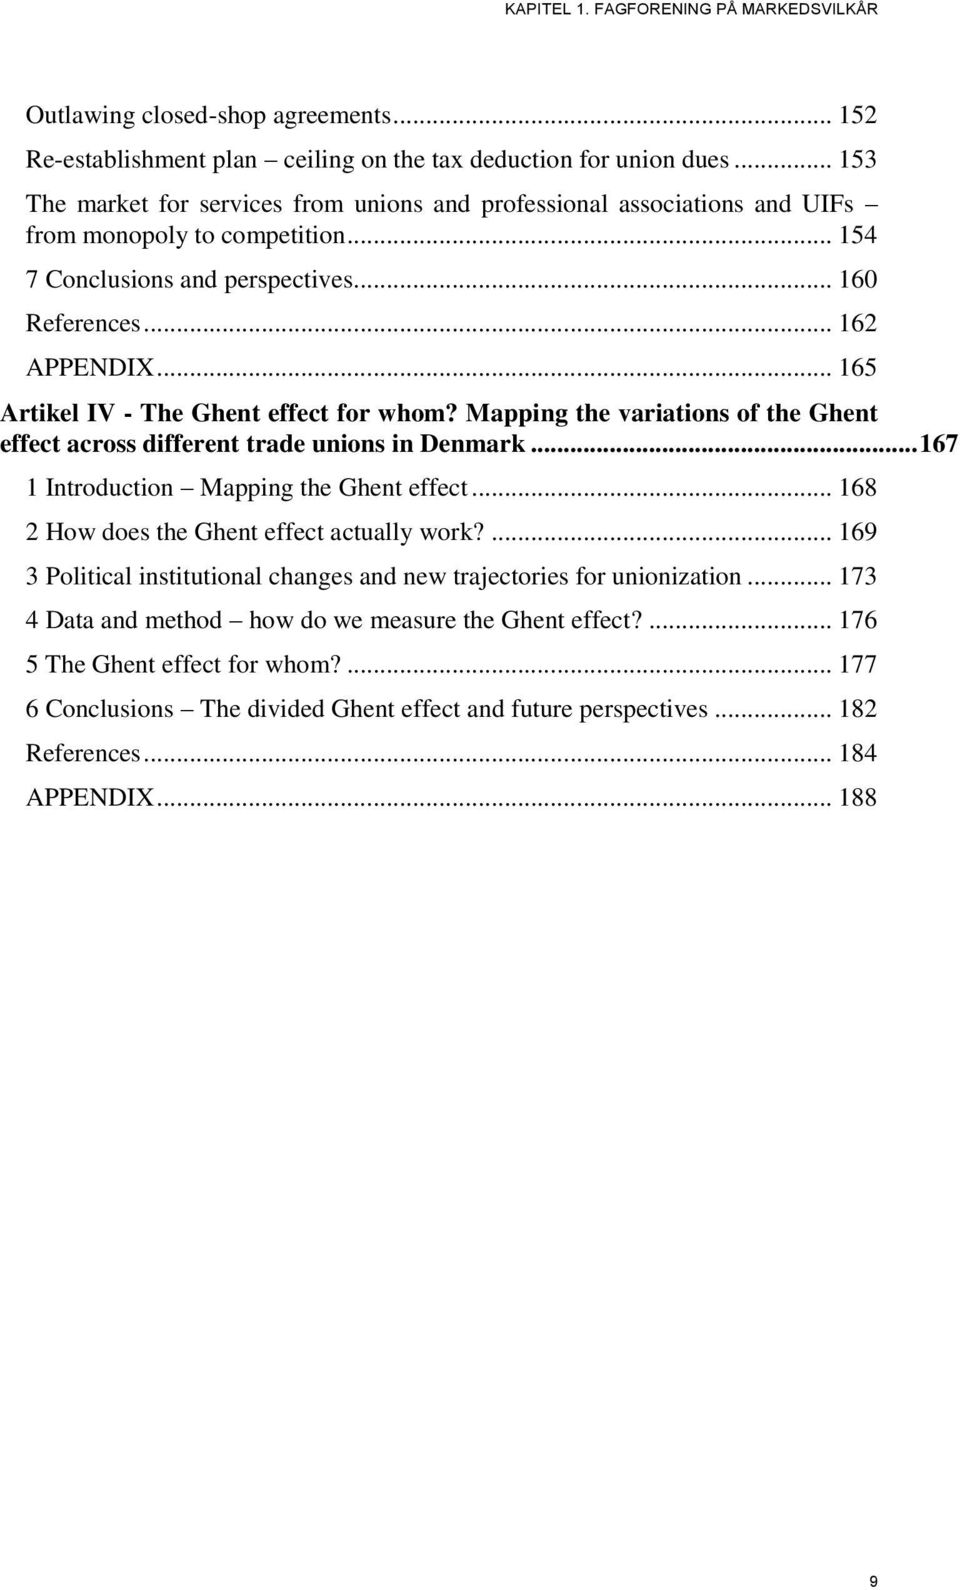 .. 165 Artikel IV - The Ghent effect for whom? Mapping the variations of the Ghent effect across different trade unions in Denmark... 167 1 Introduction Mapping the Ghent effect.